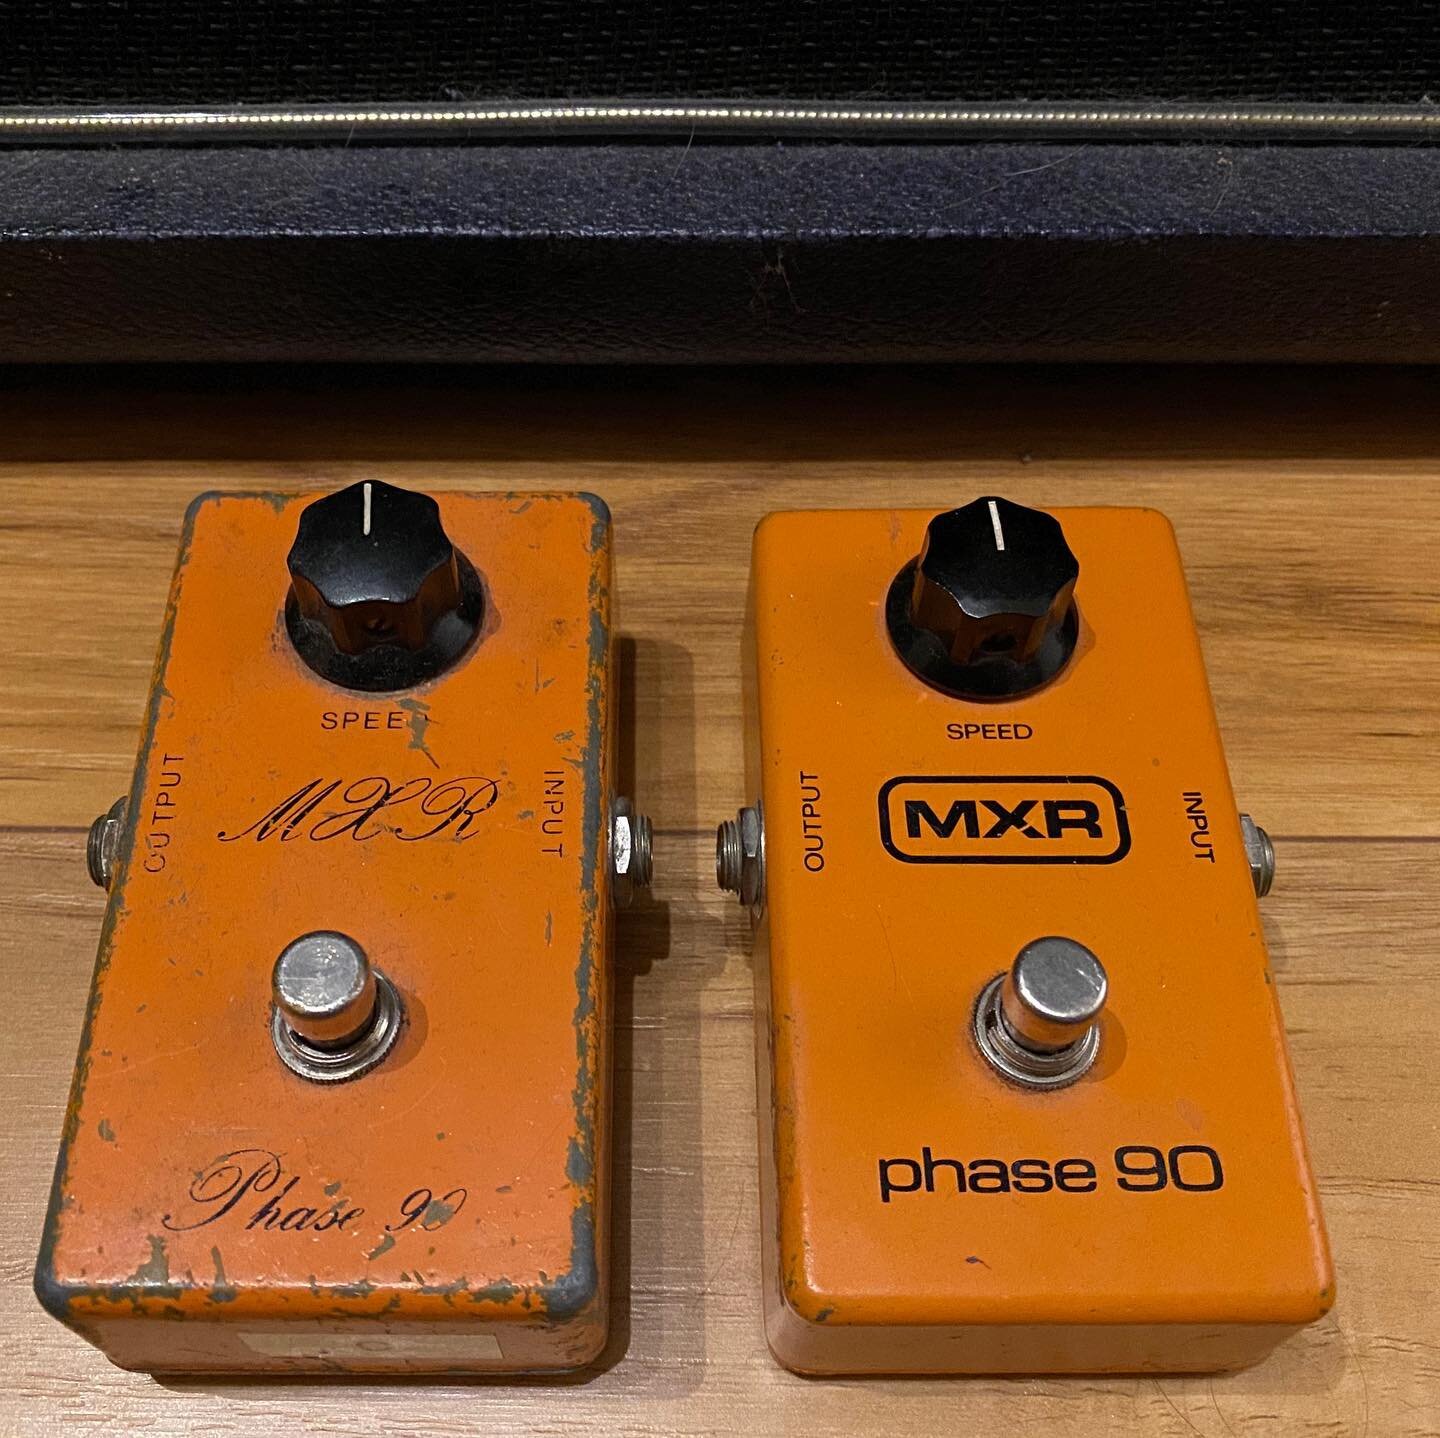 Old school/new school classics 
.
.
.
.
.
#mxrpedals #jimdunlopusa #fxpedals #recordinggear #guitarist #phase90 #mxrphase90 #musicproductions #recordproducer